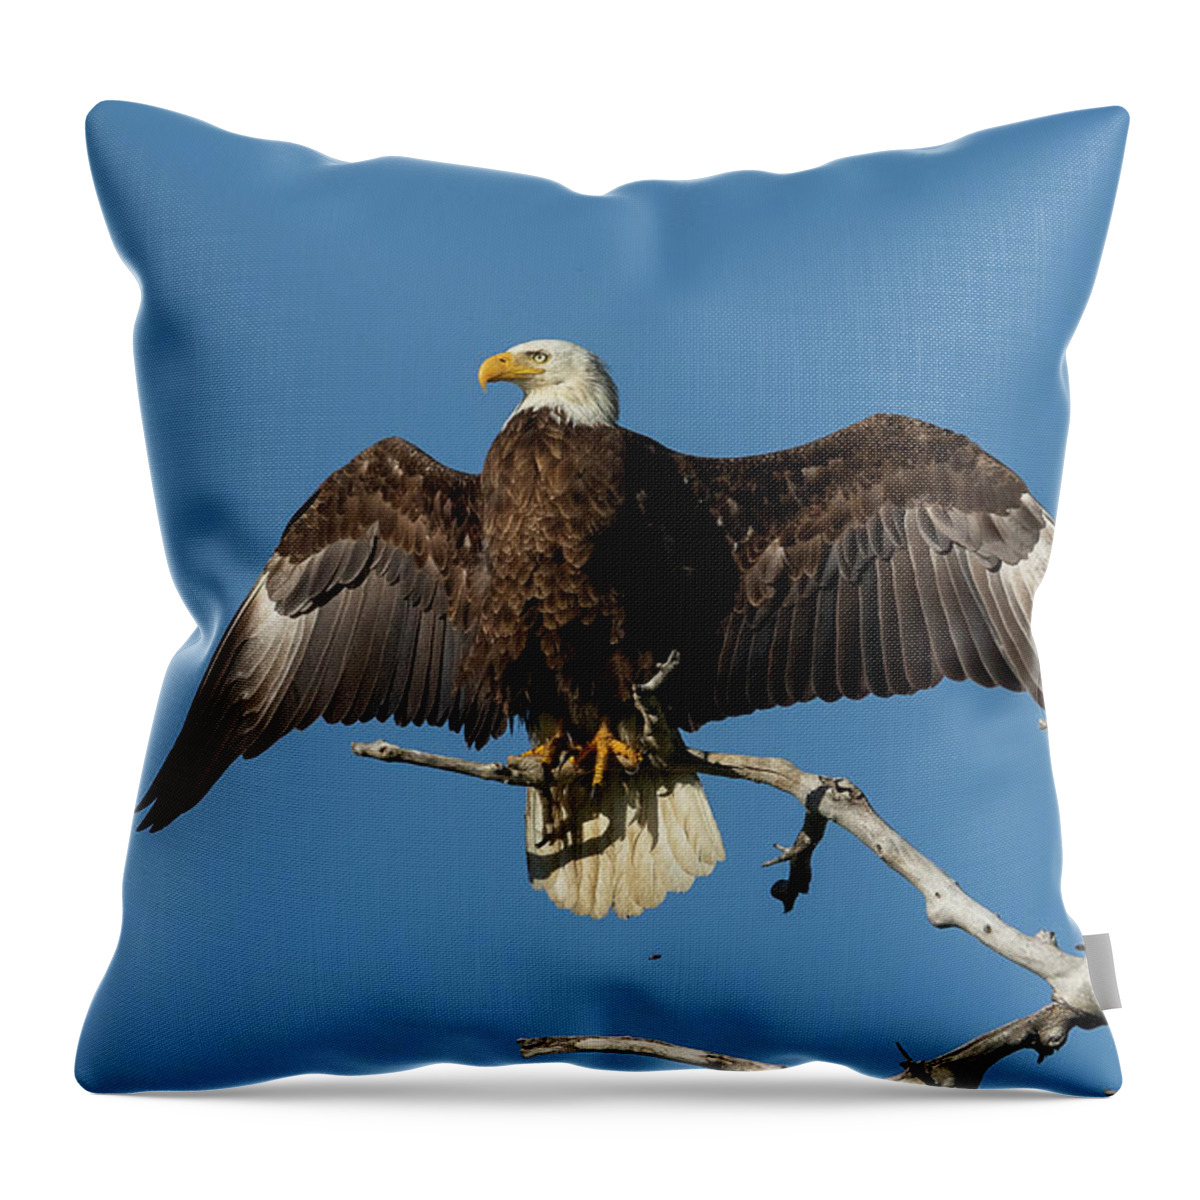 Bald Eagle Throw Pillow featuring the photograph Bald Eagle Shows Off by Tony Hake